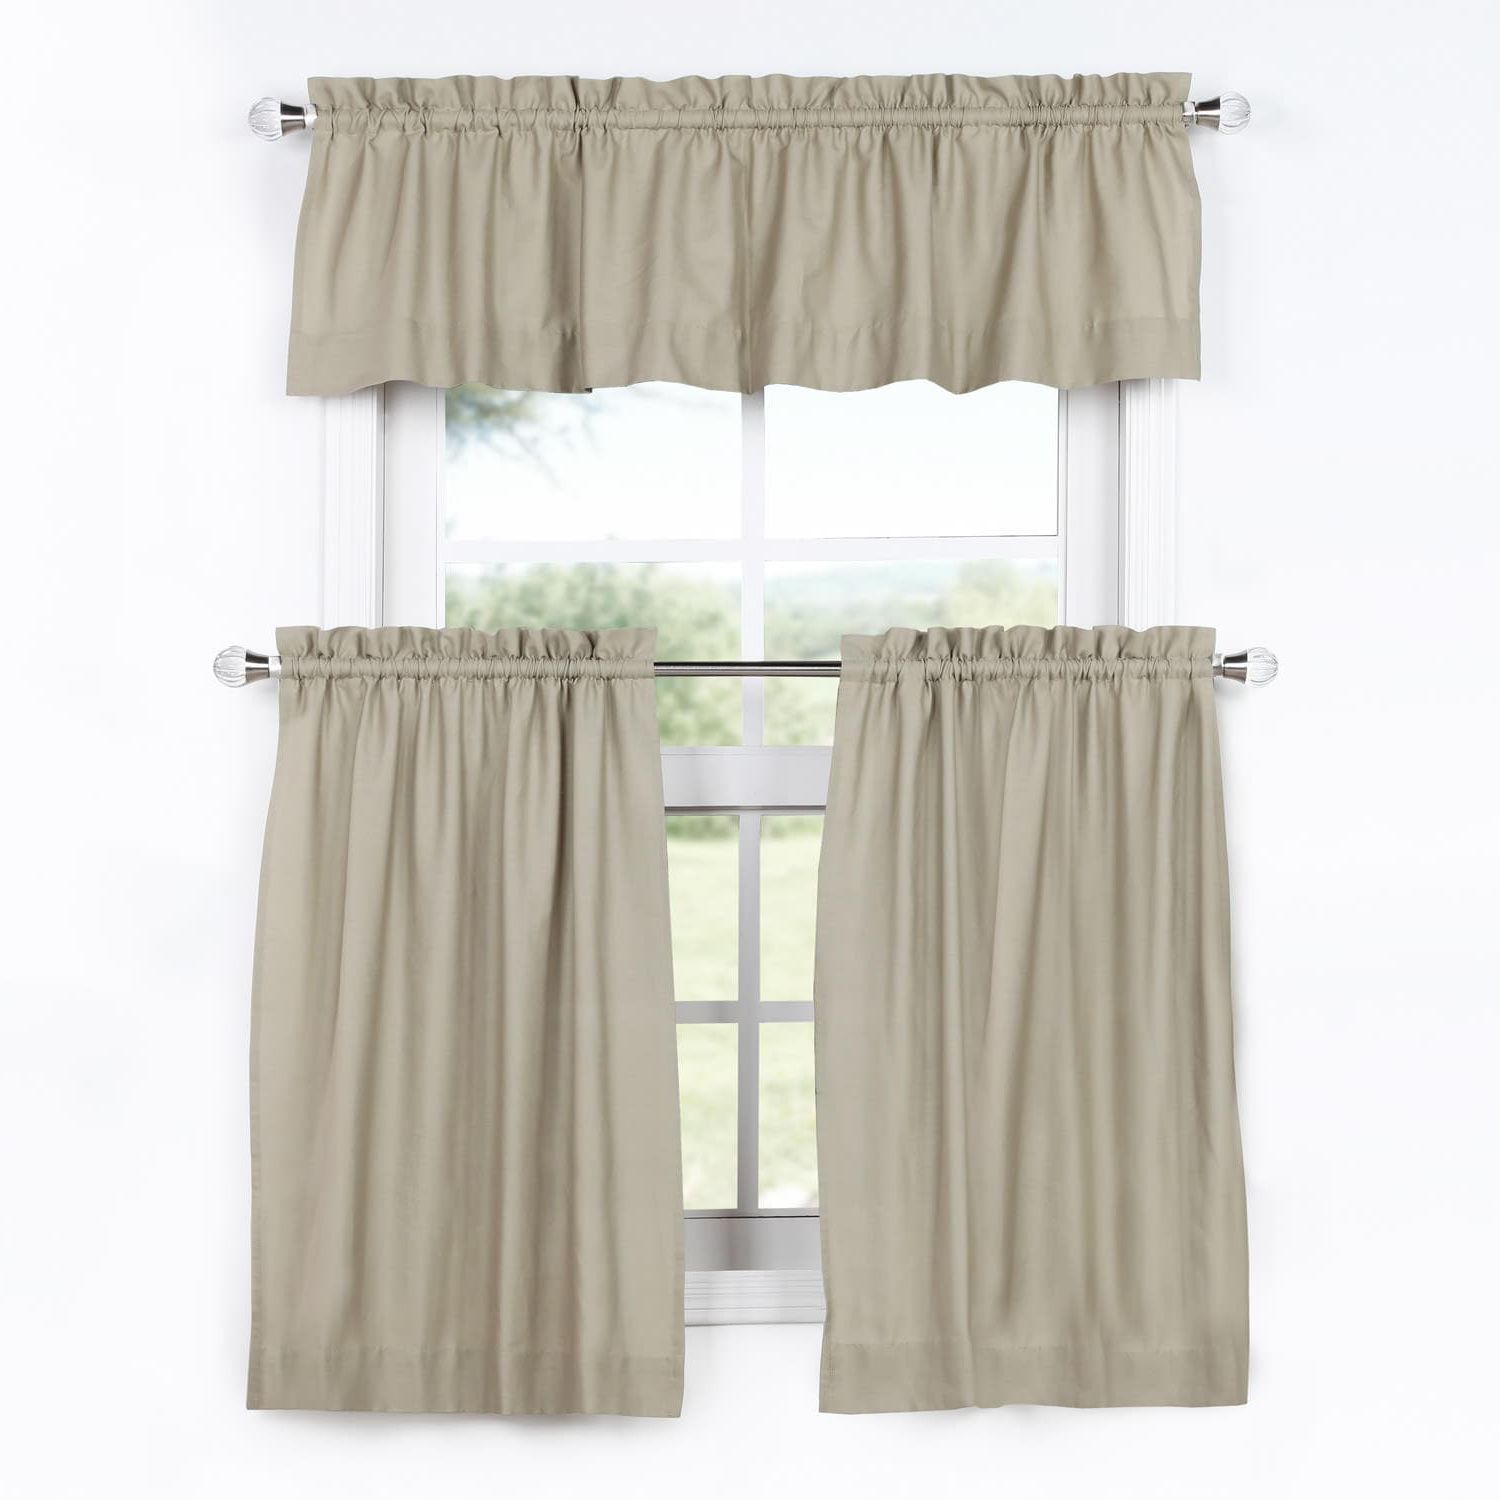 Fashionable Coastal Tier And Valance Window Curtain Sets Inside Sandstone Solid Cotton Kitchen Tier Curtain Valance Set 3pc (View 18 of 20)